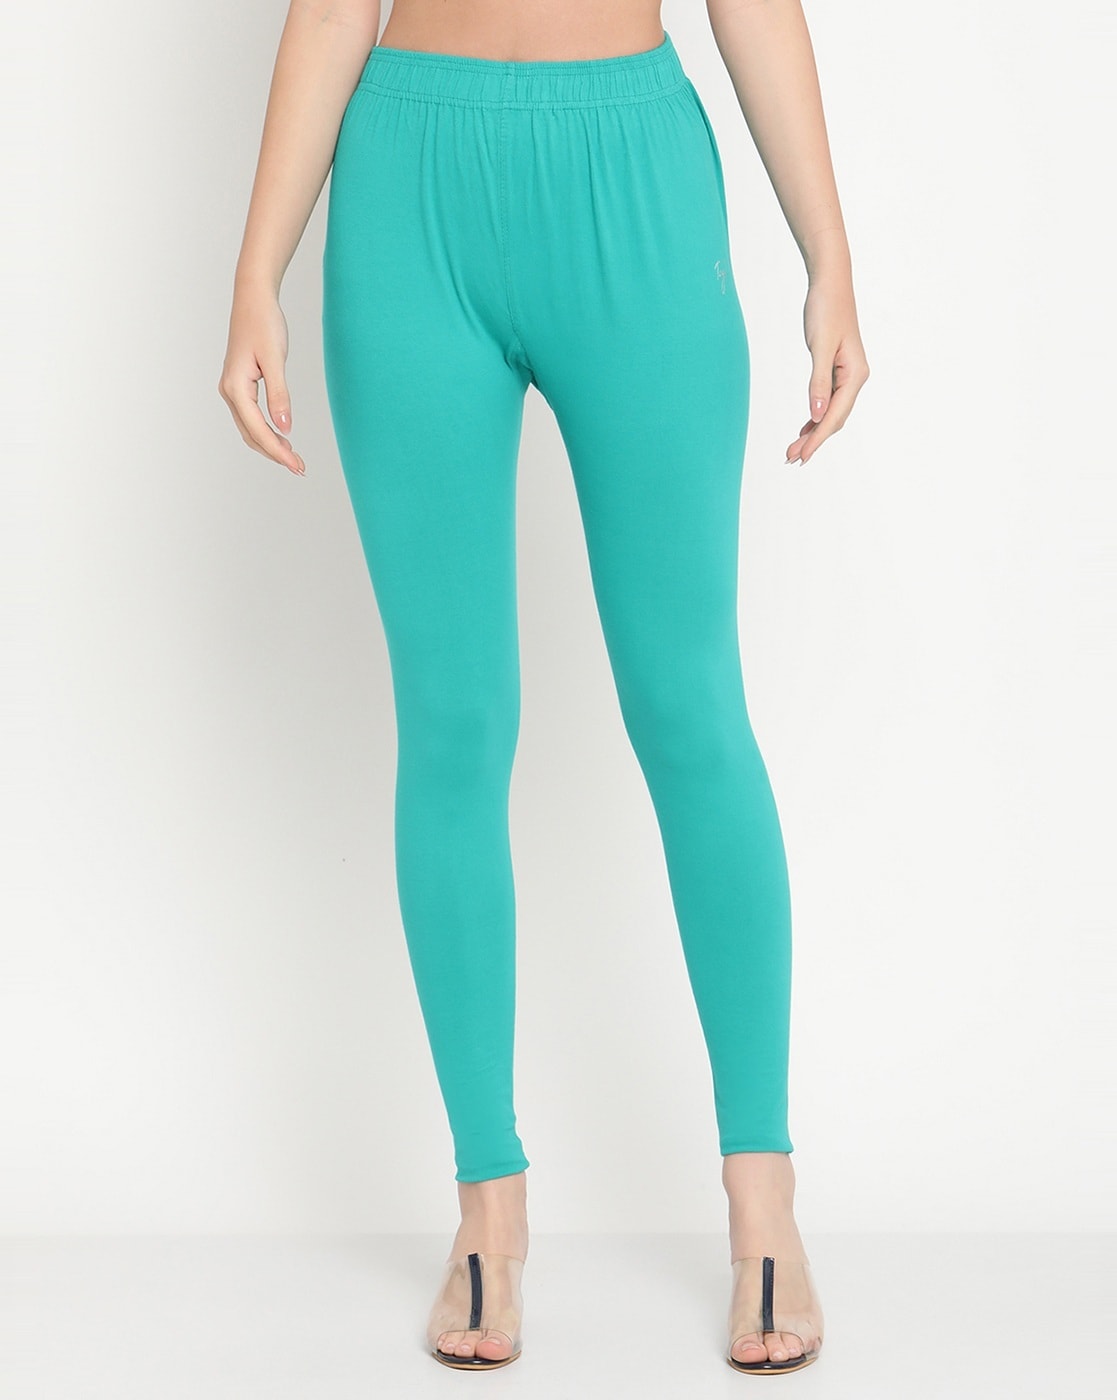 Buy Turquoise blue Leggings for Women by Tag 7 Plus Online